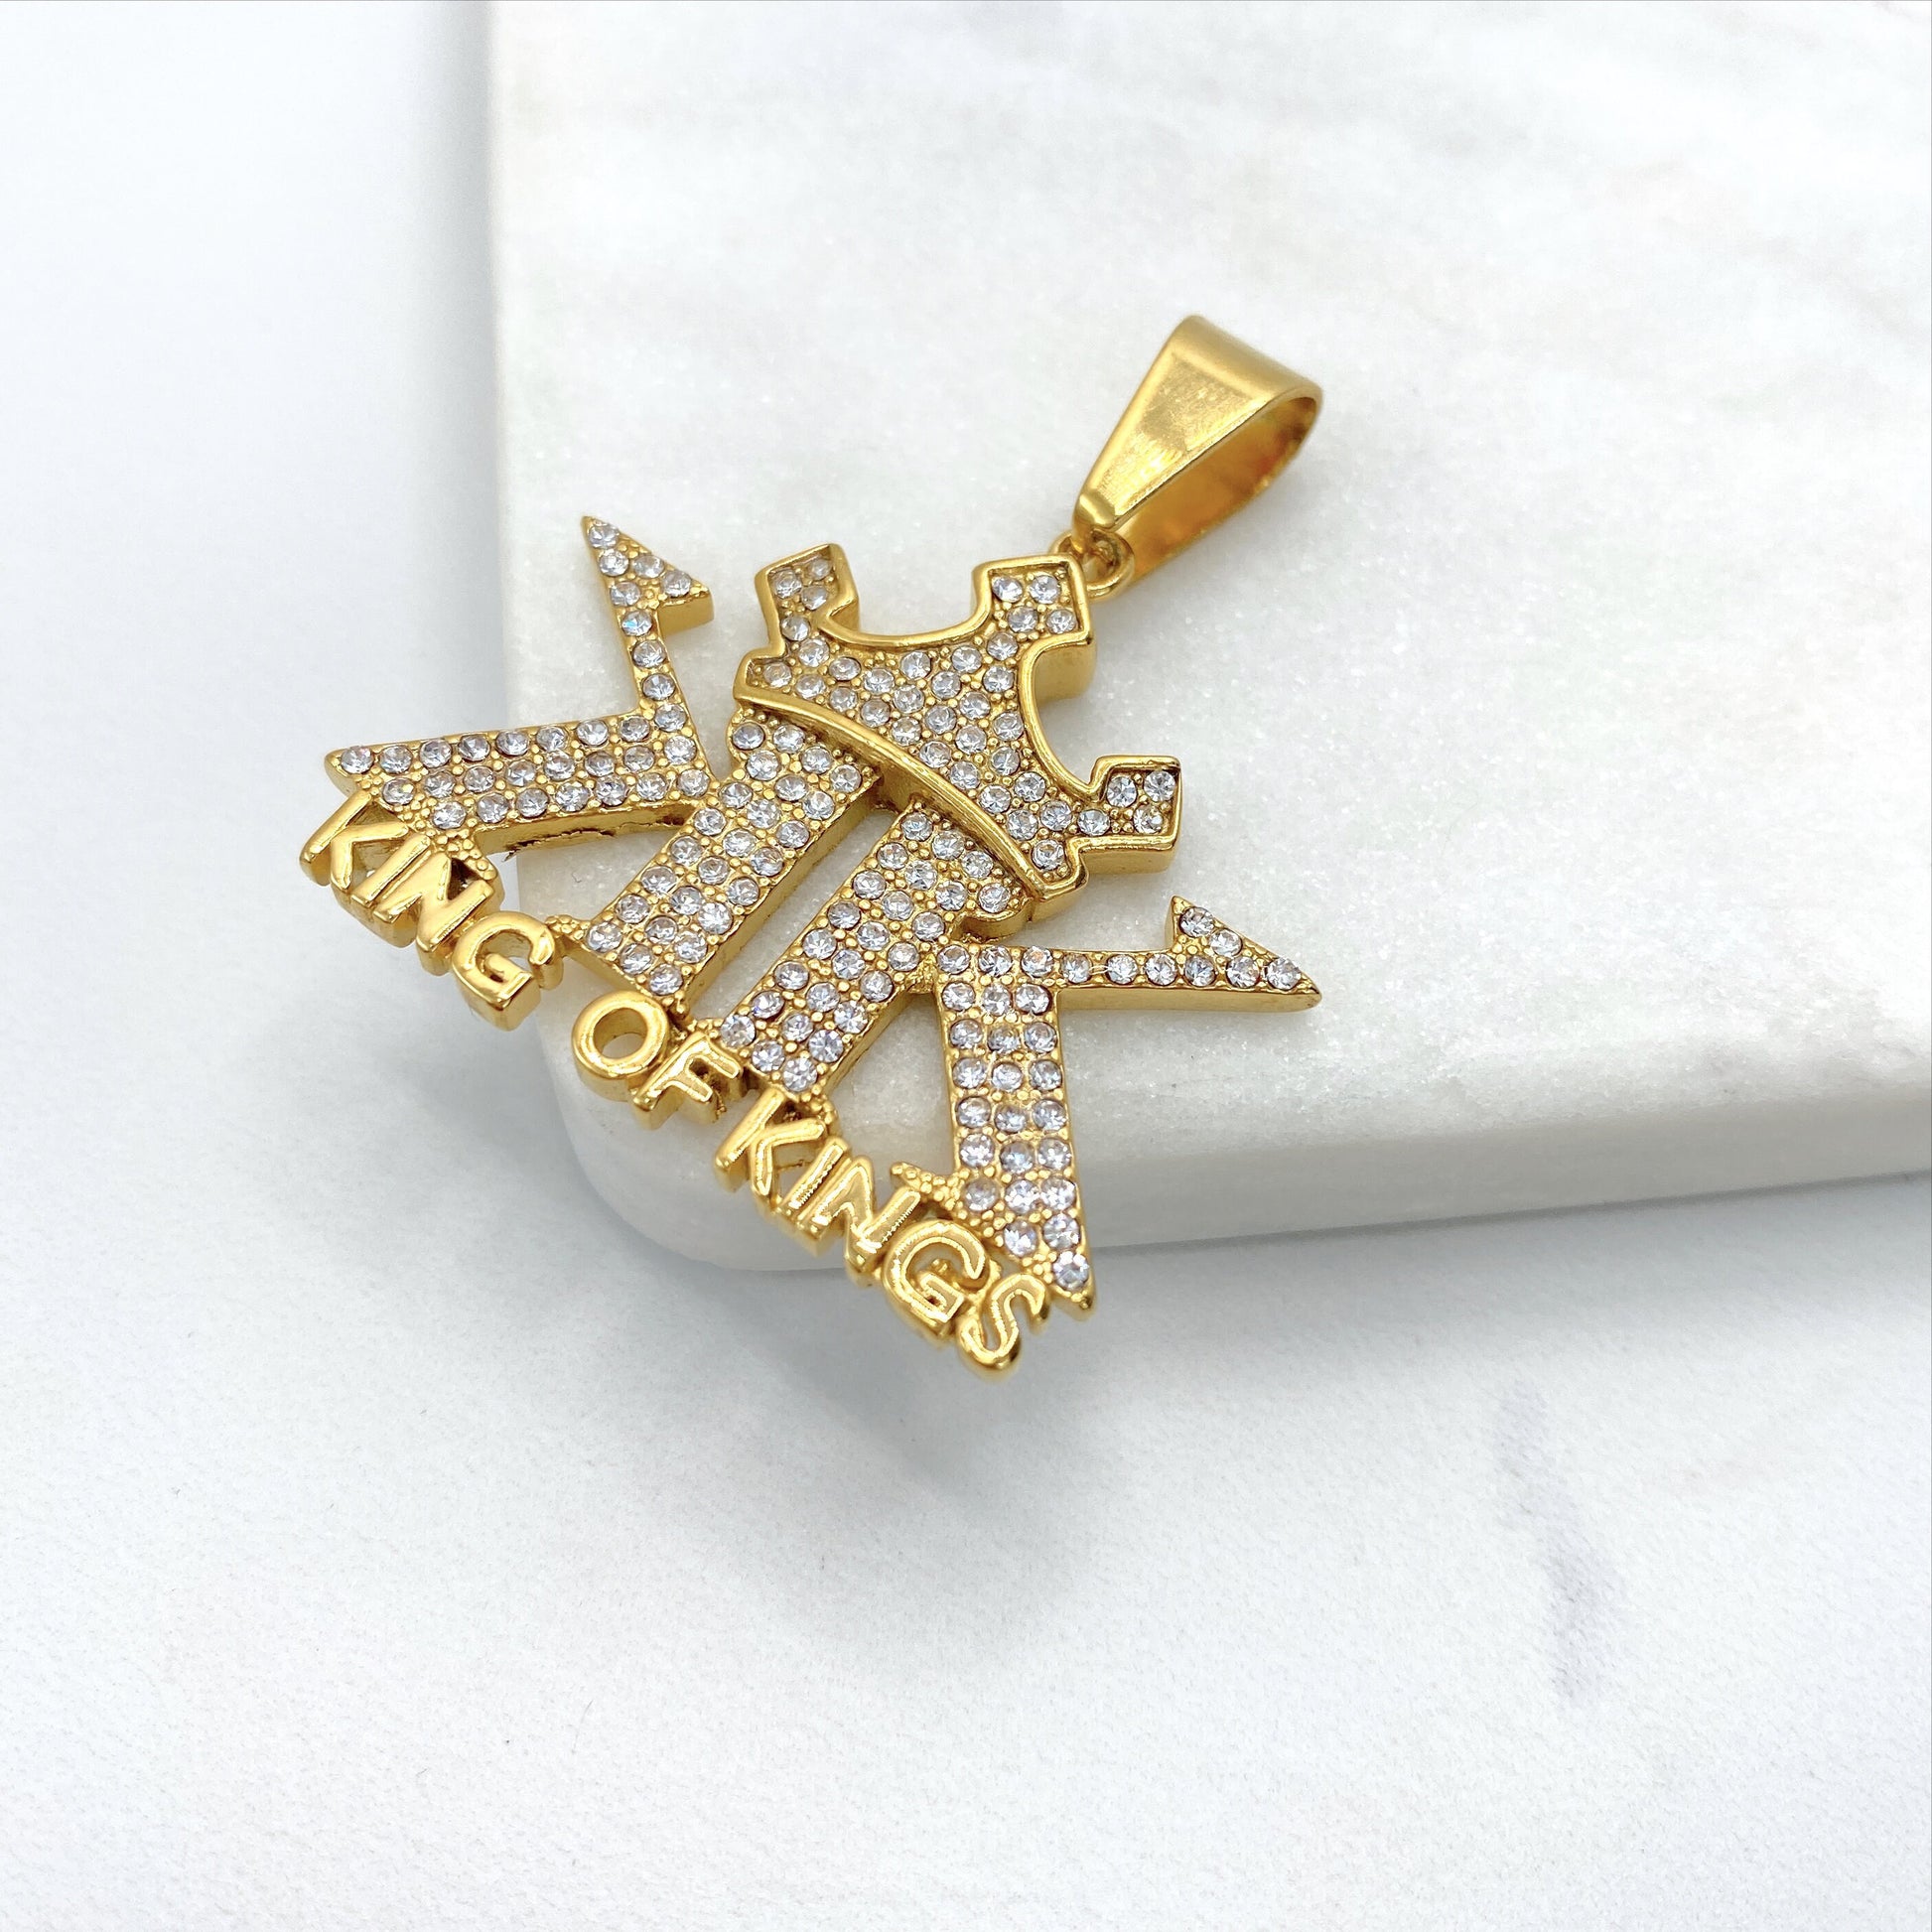 Stainless Steal, Cubic Zirconia ''King of Kings'' KK Charms Pendant, Gold or Silver, Wholesale Jewelry Making Supplies